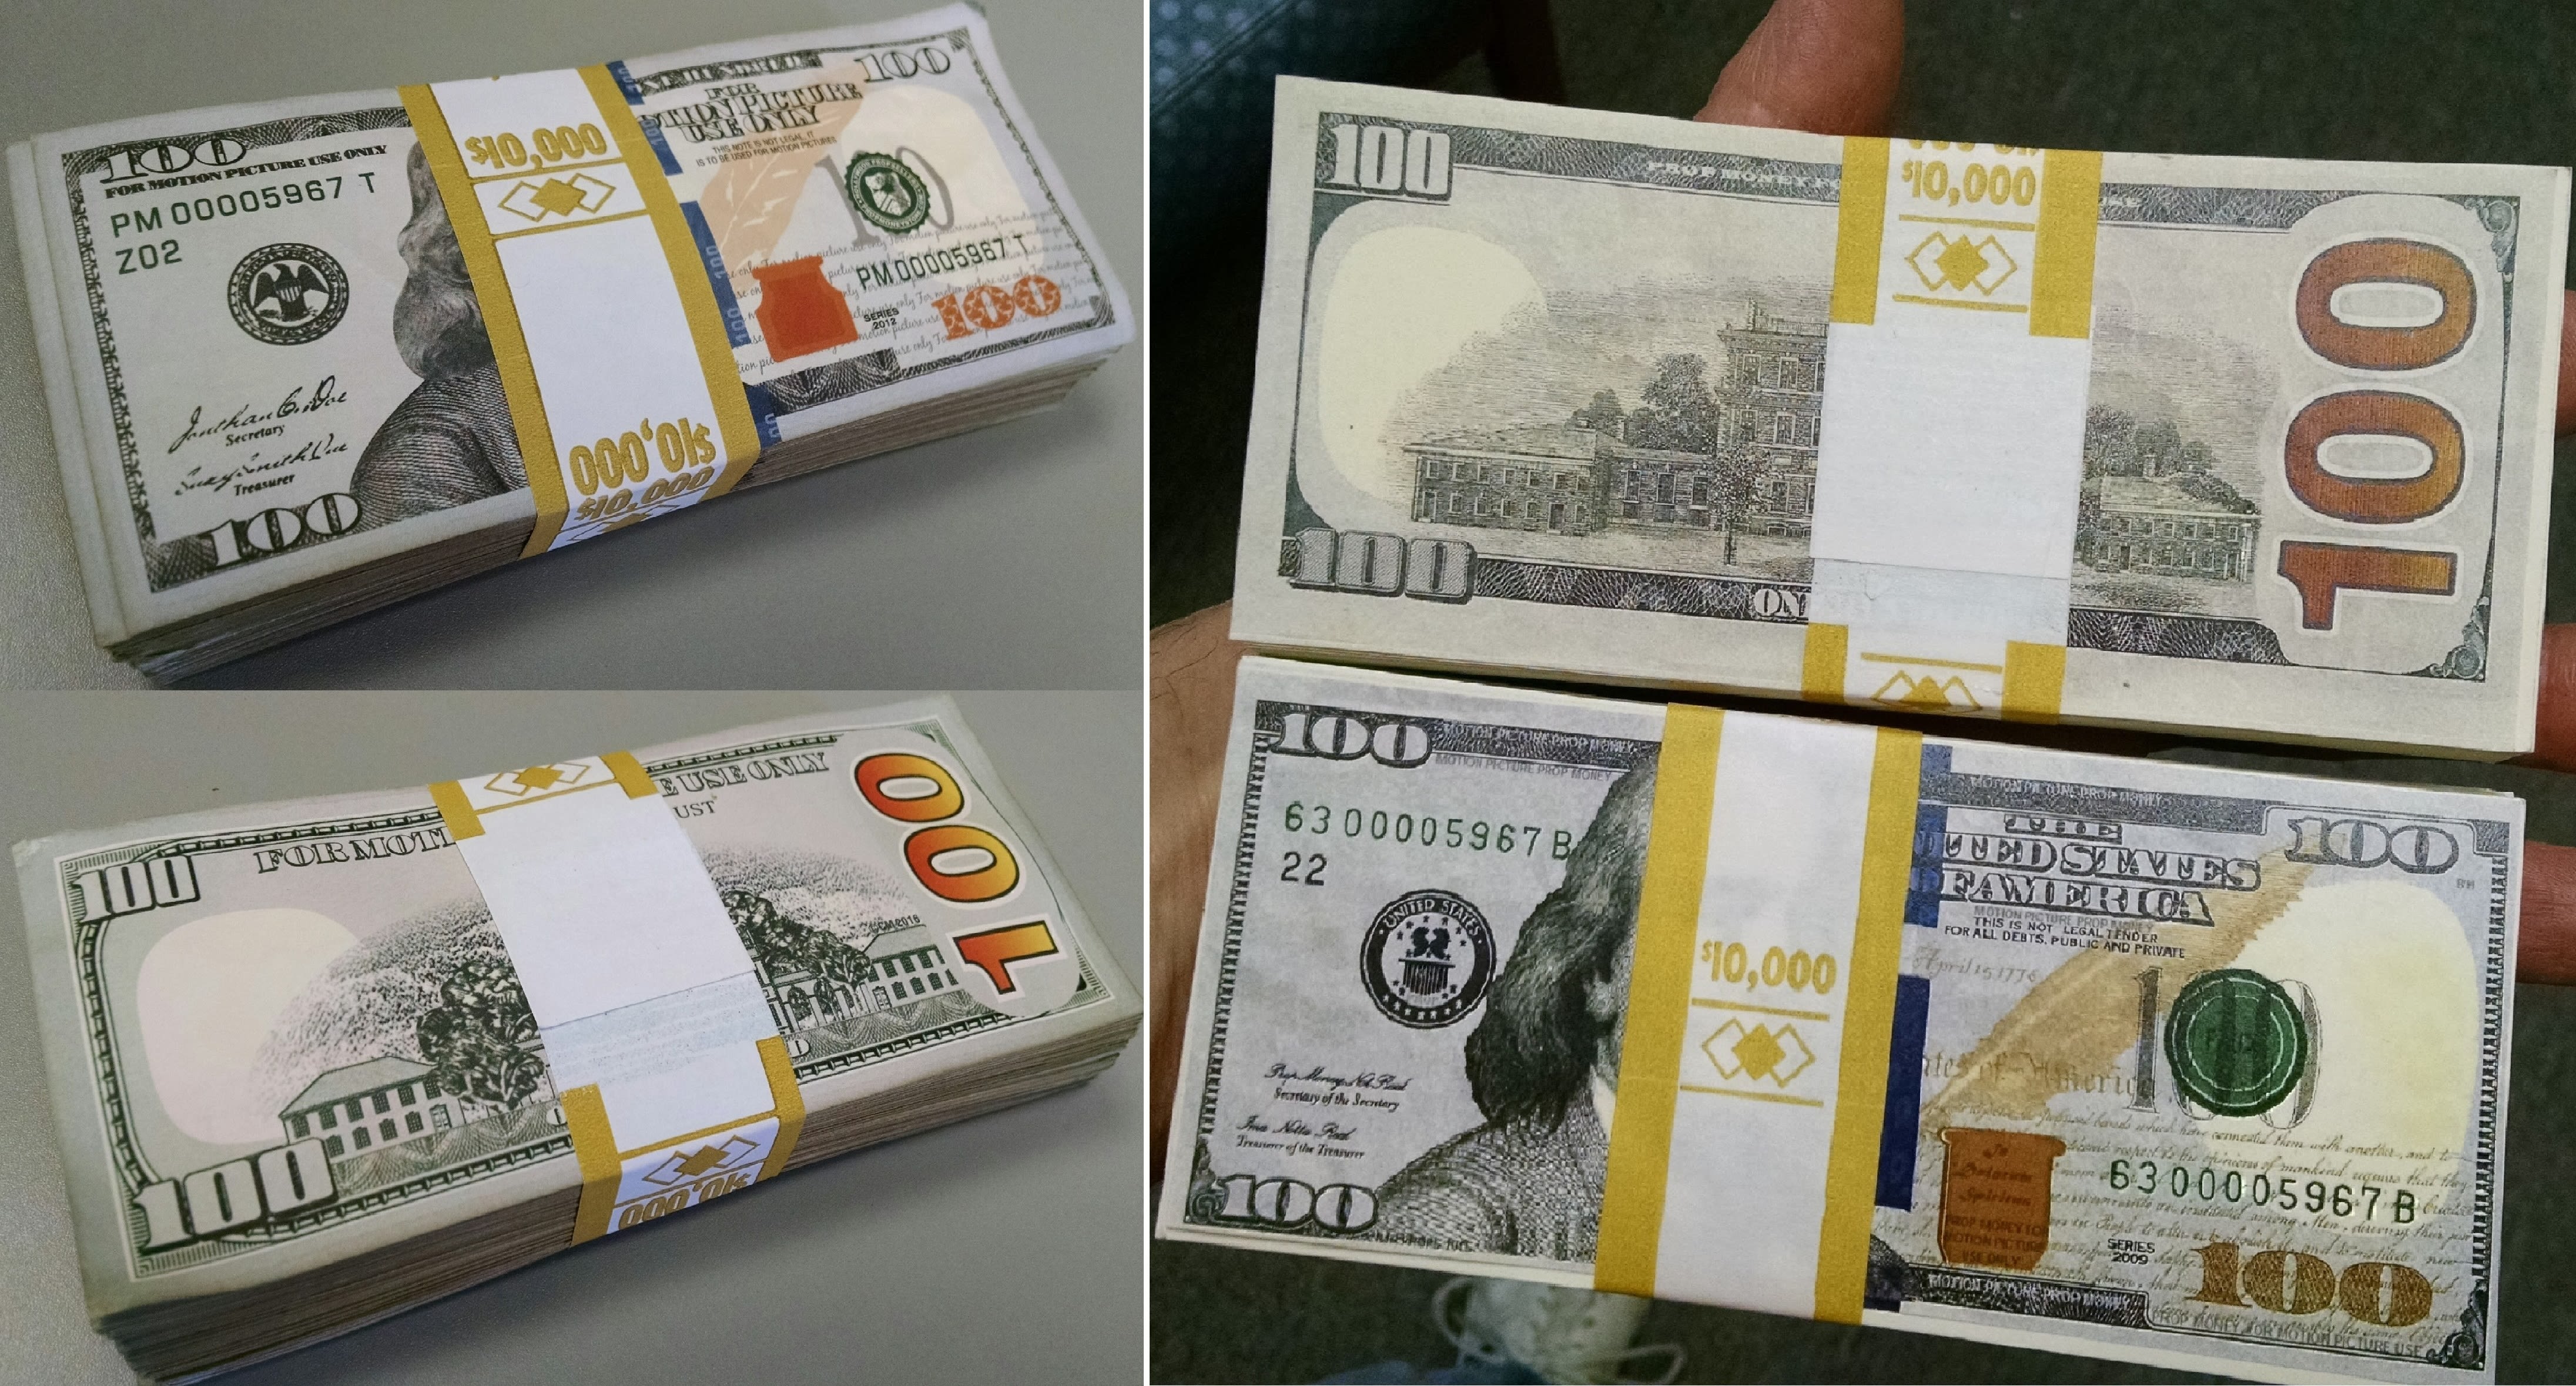 Where does fake movie money come from?